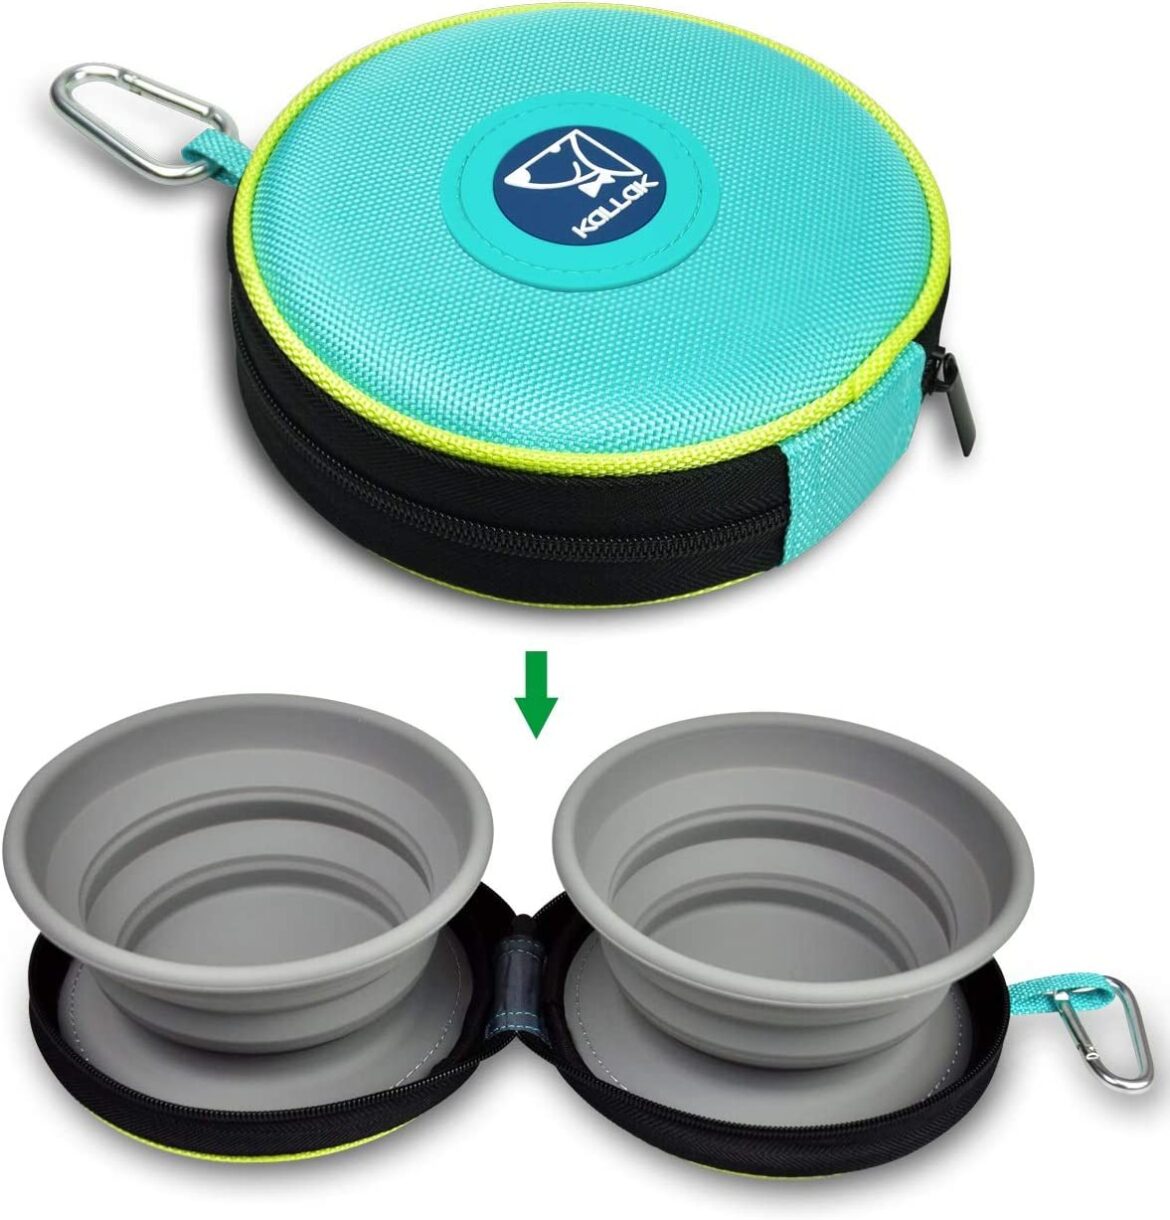 collapsible-food-water-dish.jpg